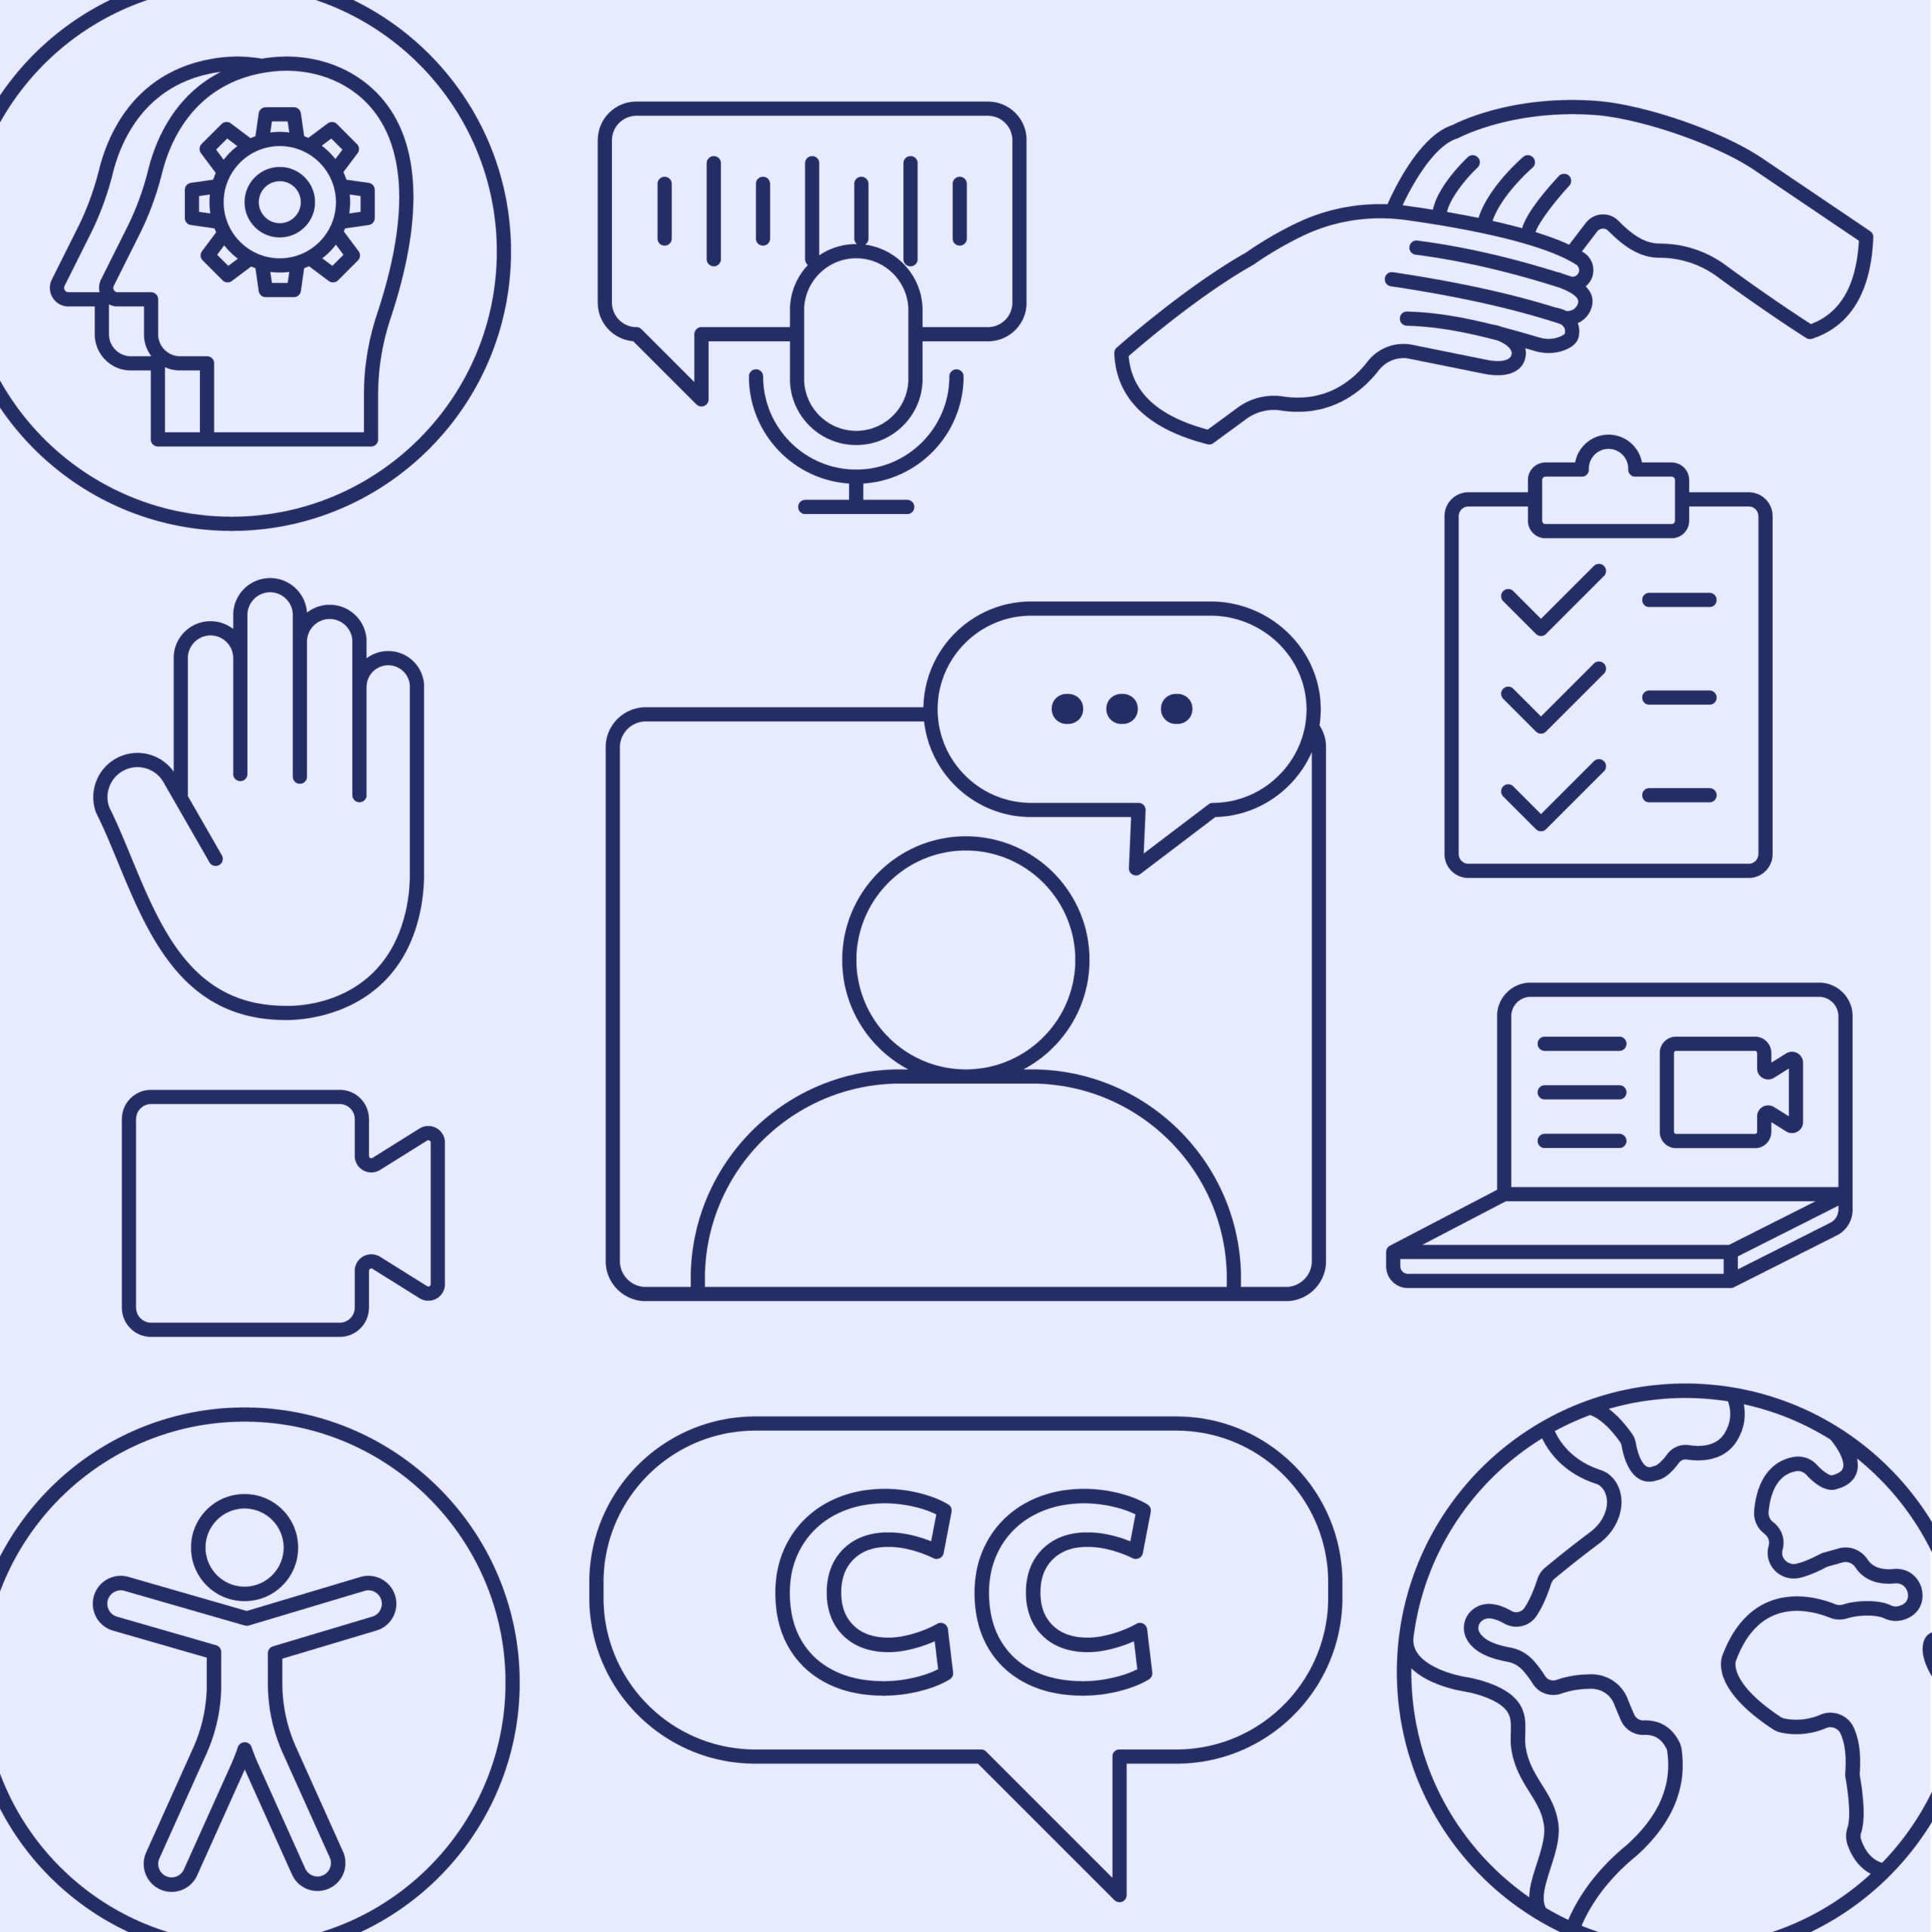 Various accessibility icons against light blue background.